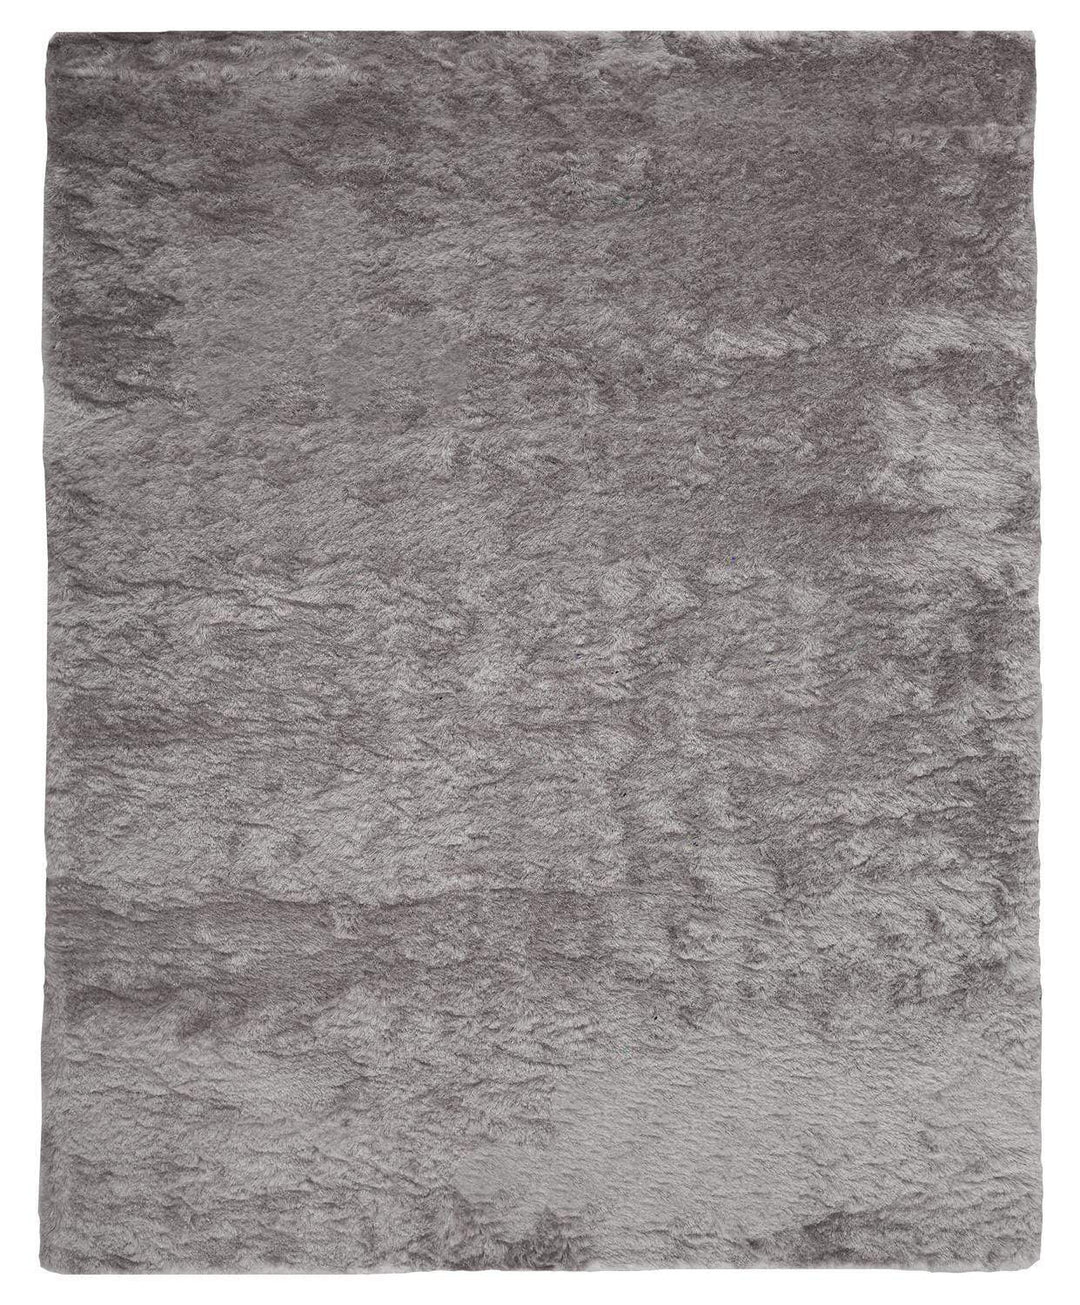 Feizy Feizy Indochine Plush Shag Rug - Available in 7 Sizes - Metallic Sheen Platinum & Gray 2' x 3'-4" 4944550FPLA000A25